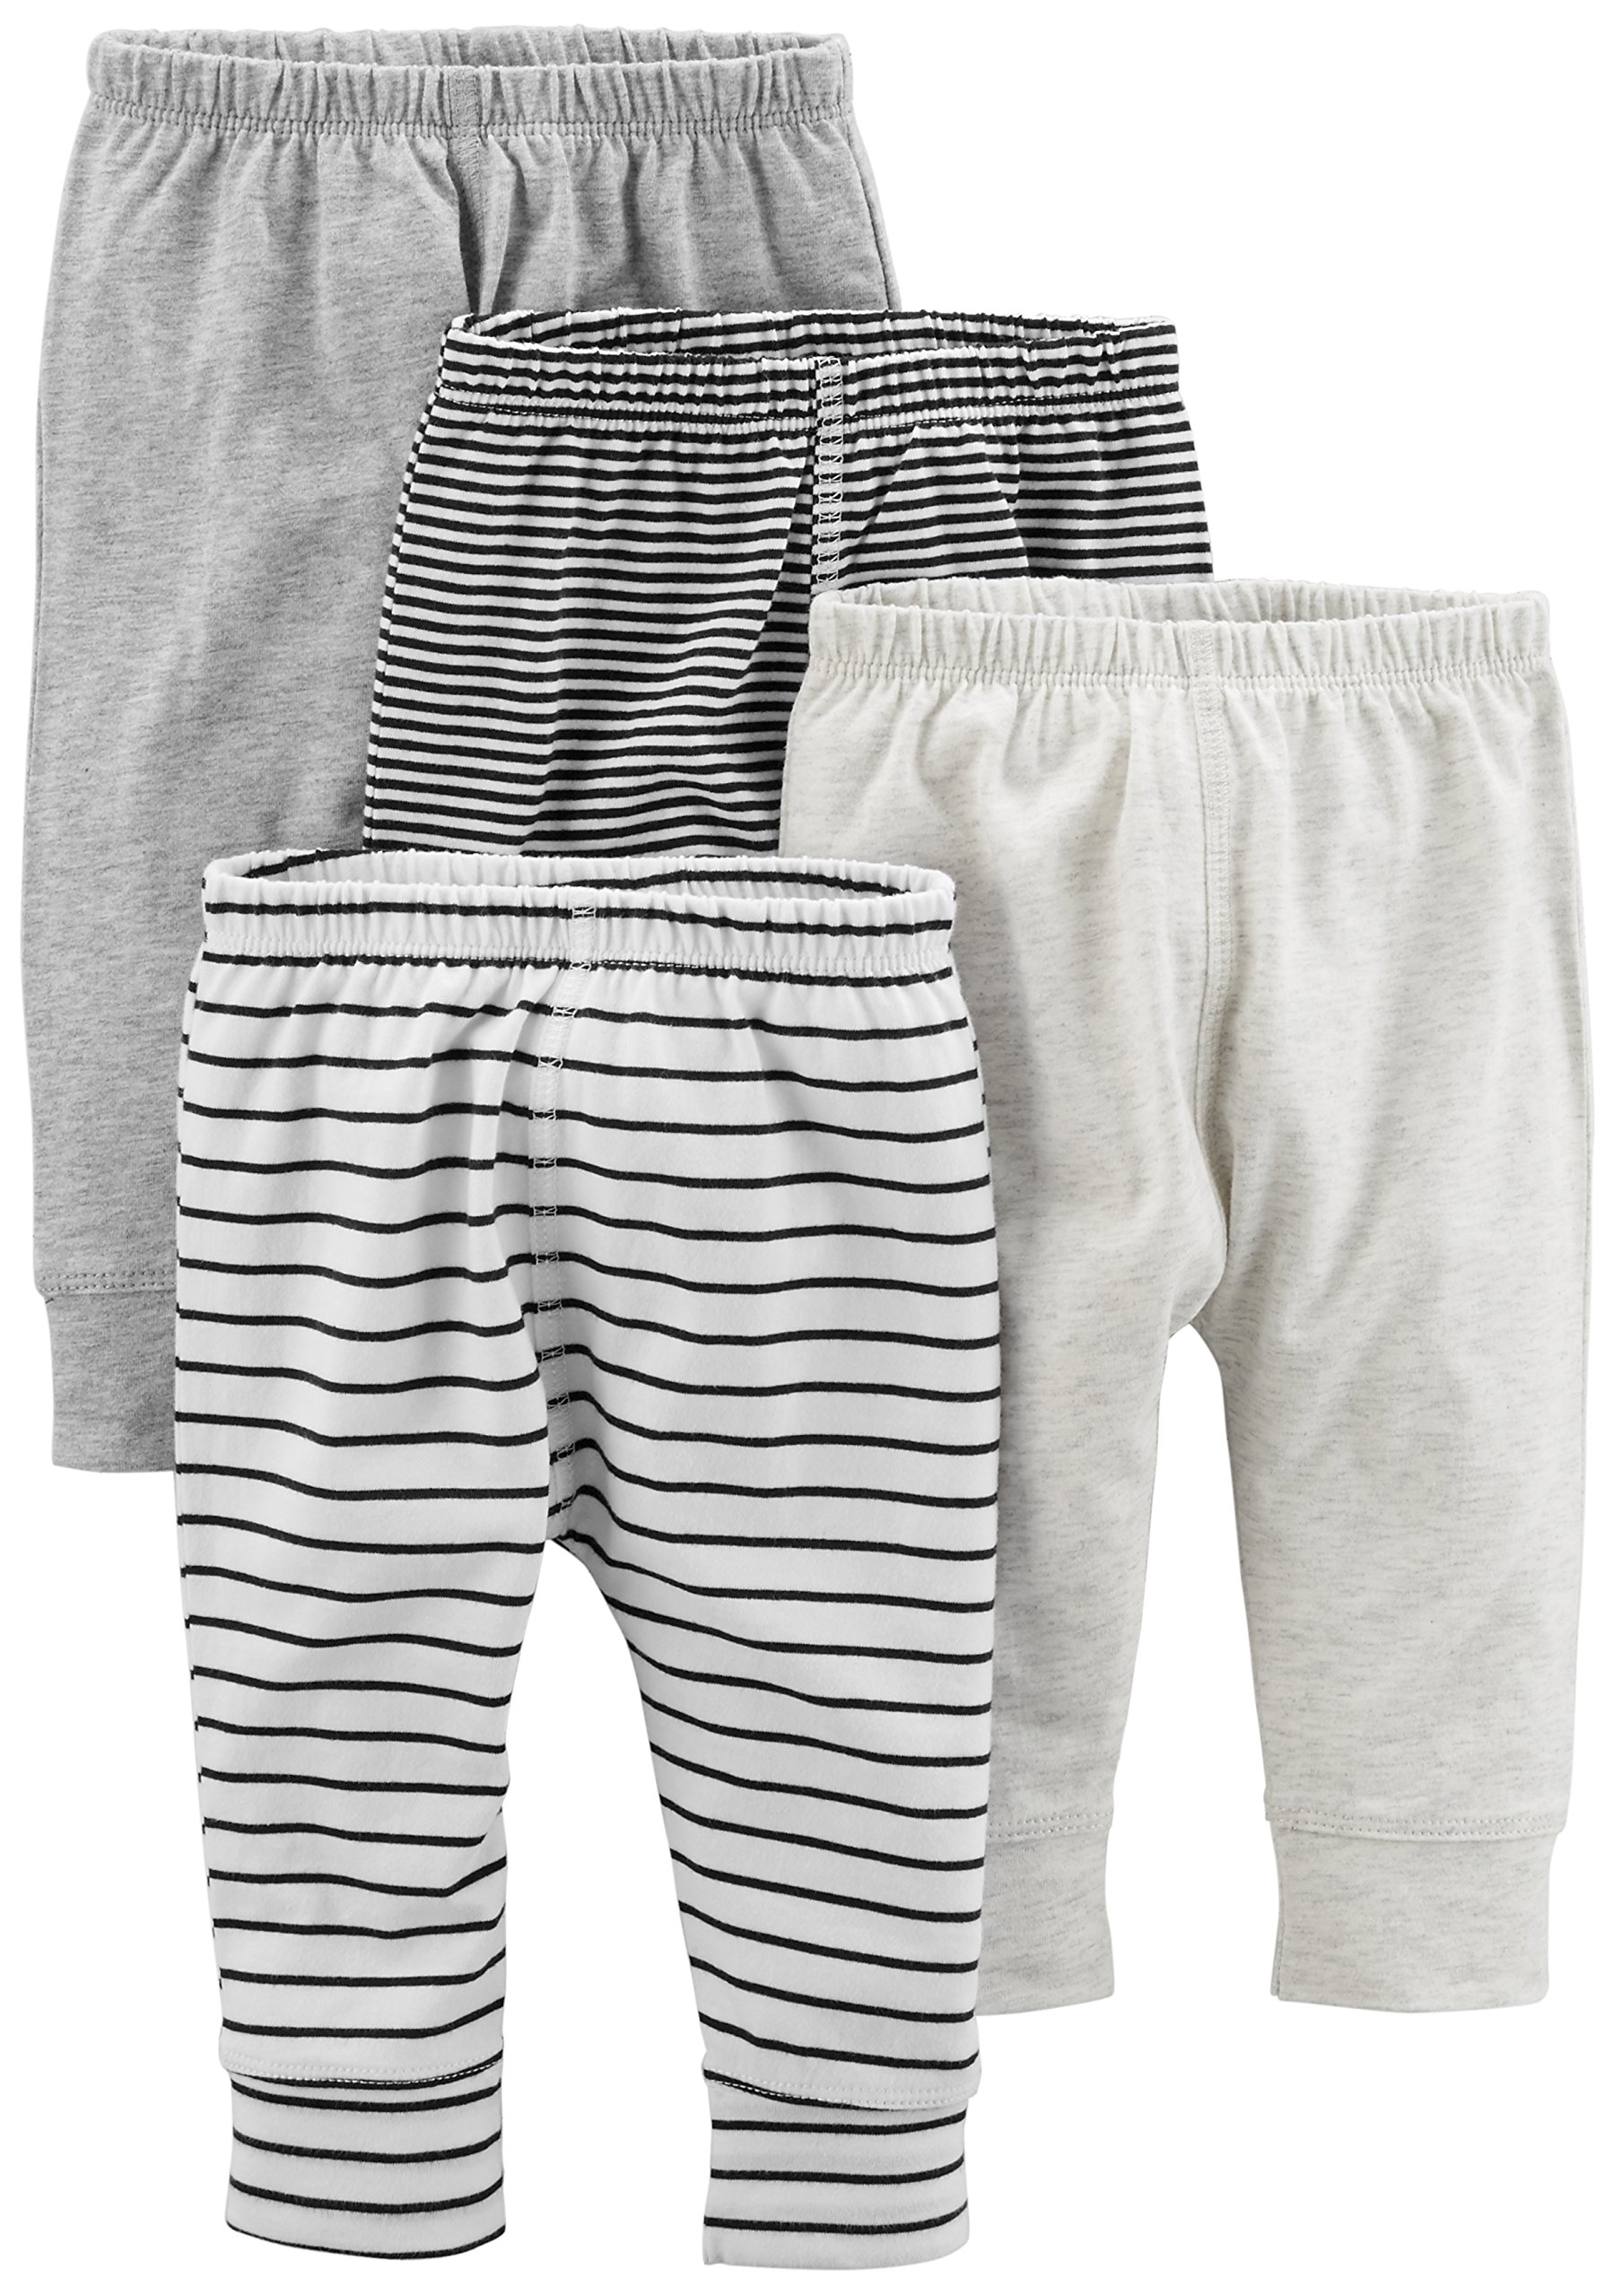 Simple Joys by Carter's Unisex Babies' Pant, Pack of 4